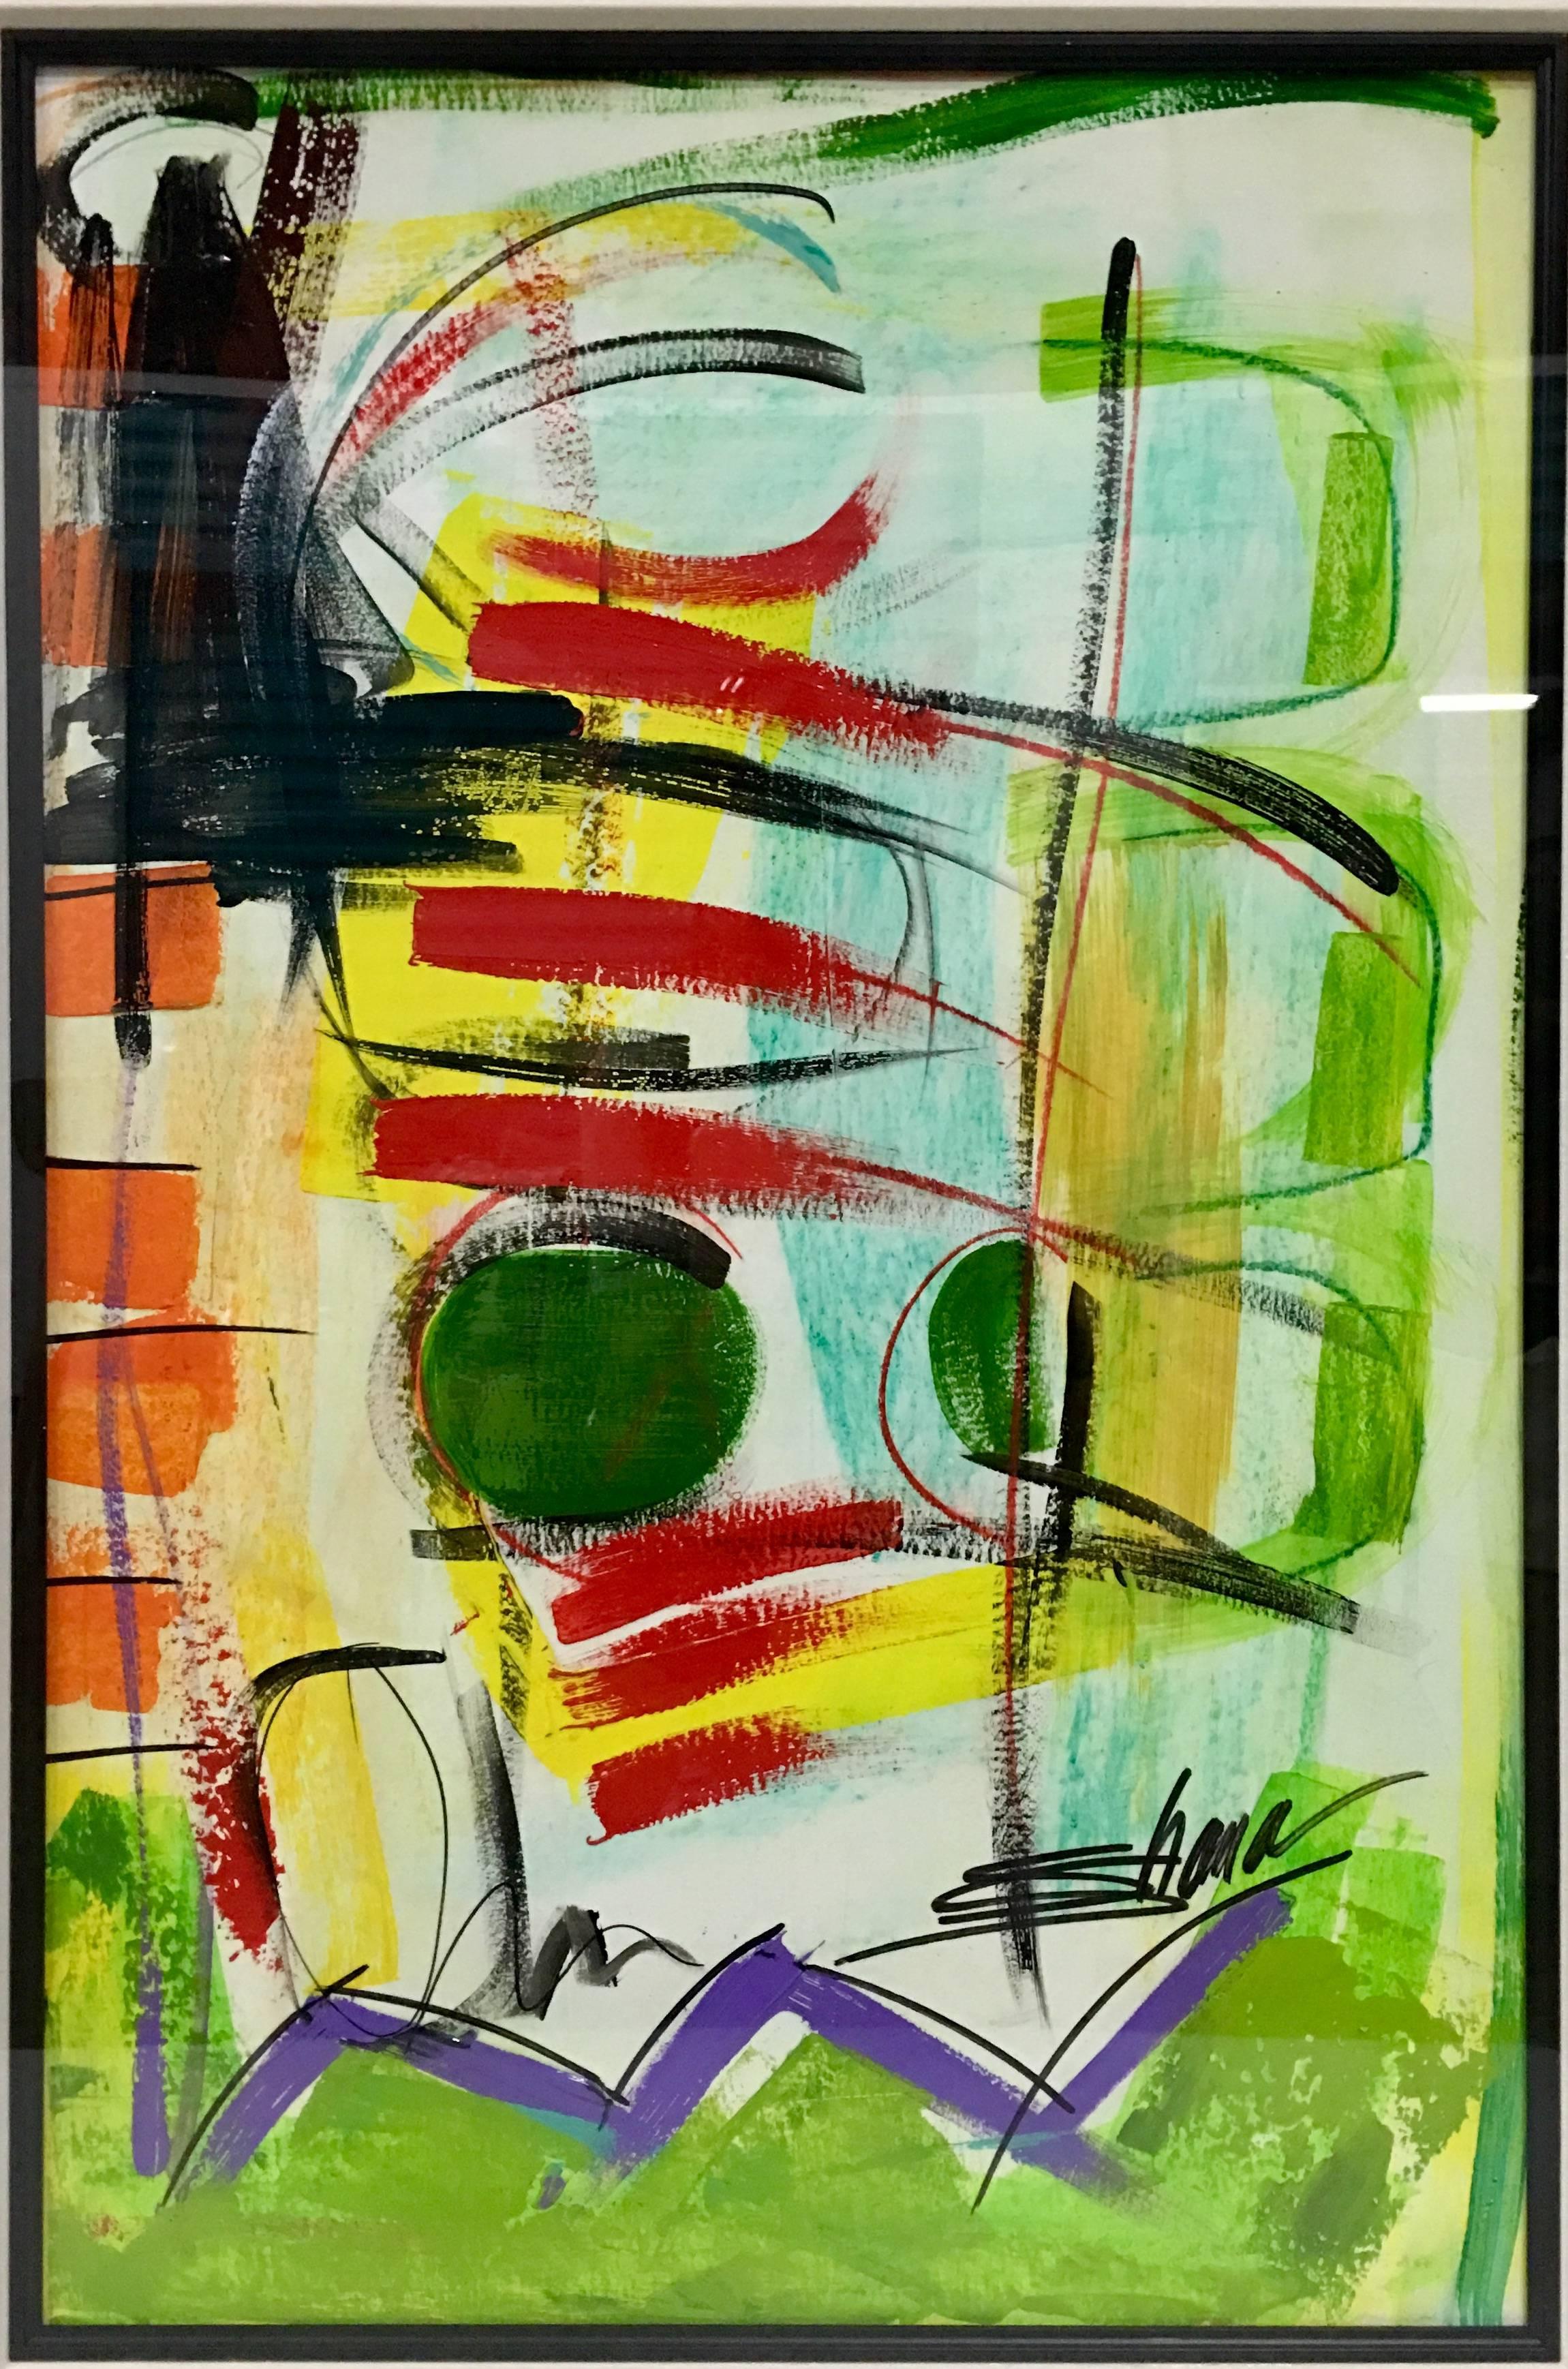 Contemporary Original oil painting acrylic on paper, framed and hand signed lower right by, Shana Dominguez. Titled, 